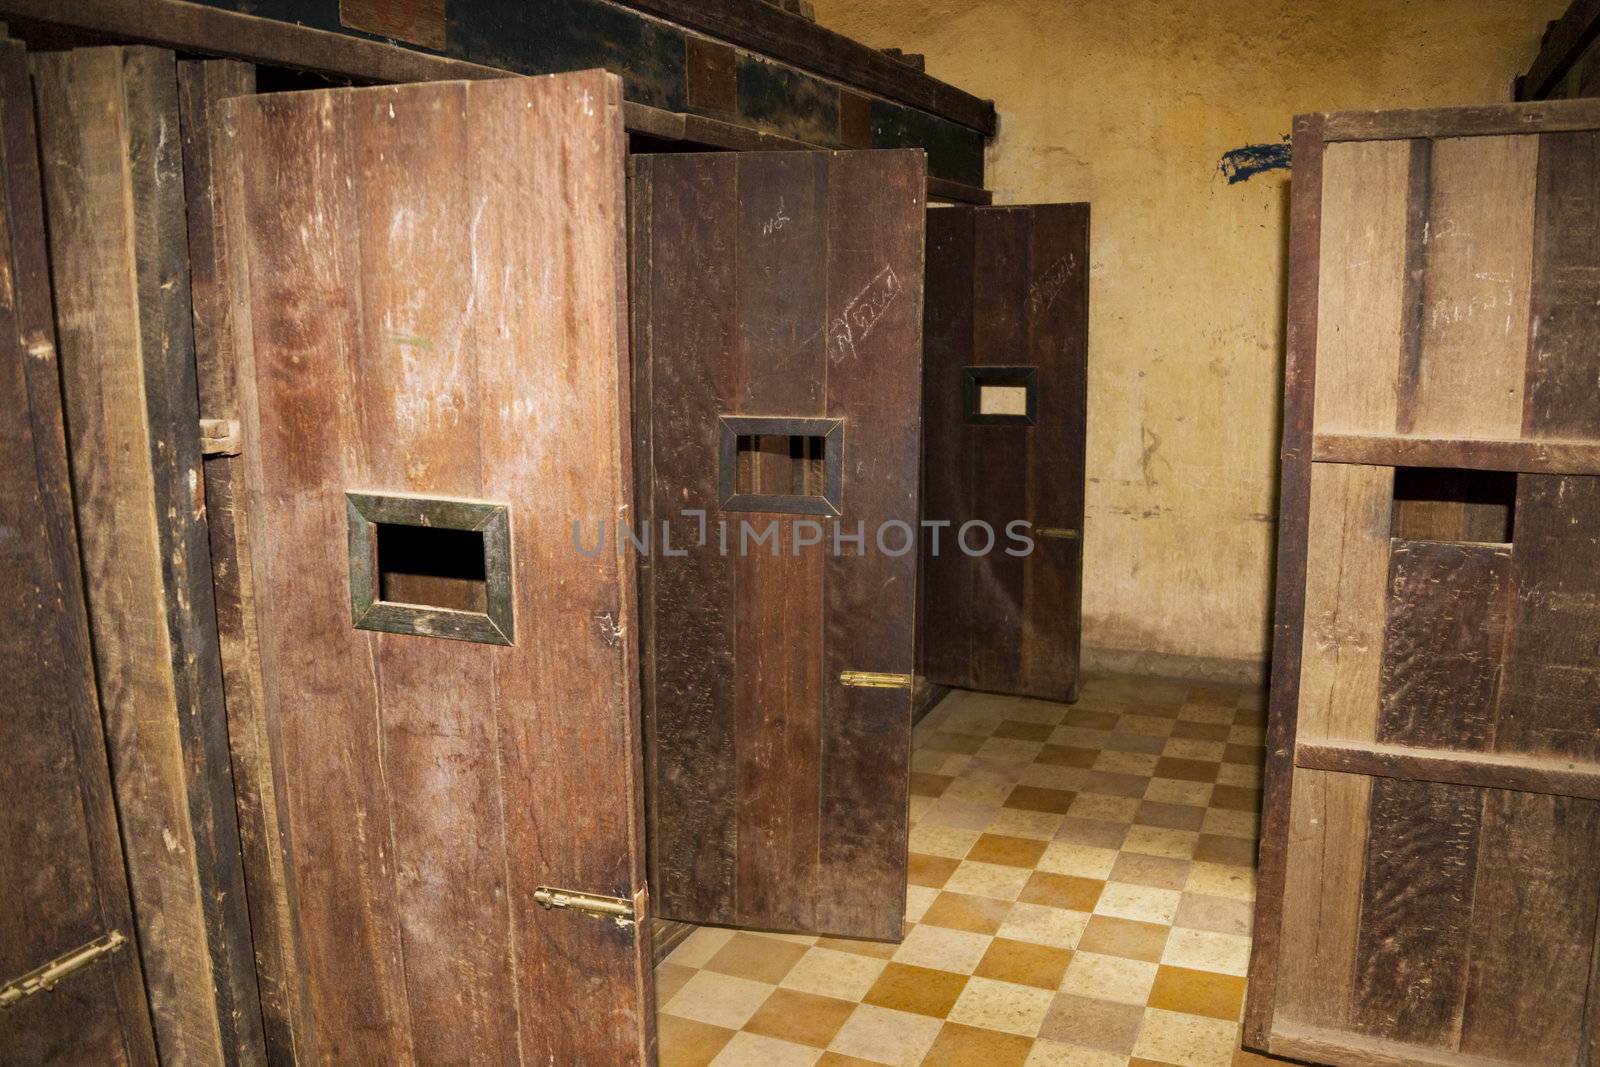 This is the actual prison cells where many Cambodians were tortured and murdered by the Khmer Rouge. Formerly a school, converted into what was known as the notorious Security Prison 21 (S-21). About 17,000 people were interned here and only 12 survived. Now part of the Tuol Sleng Genocide Museum and it is in the same condition as when it was found by the liberating Vietnamese forces.